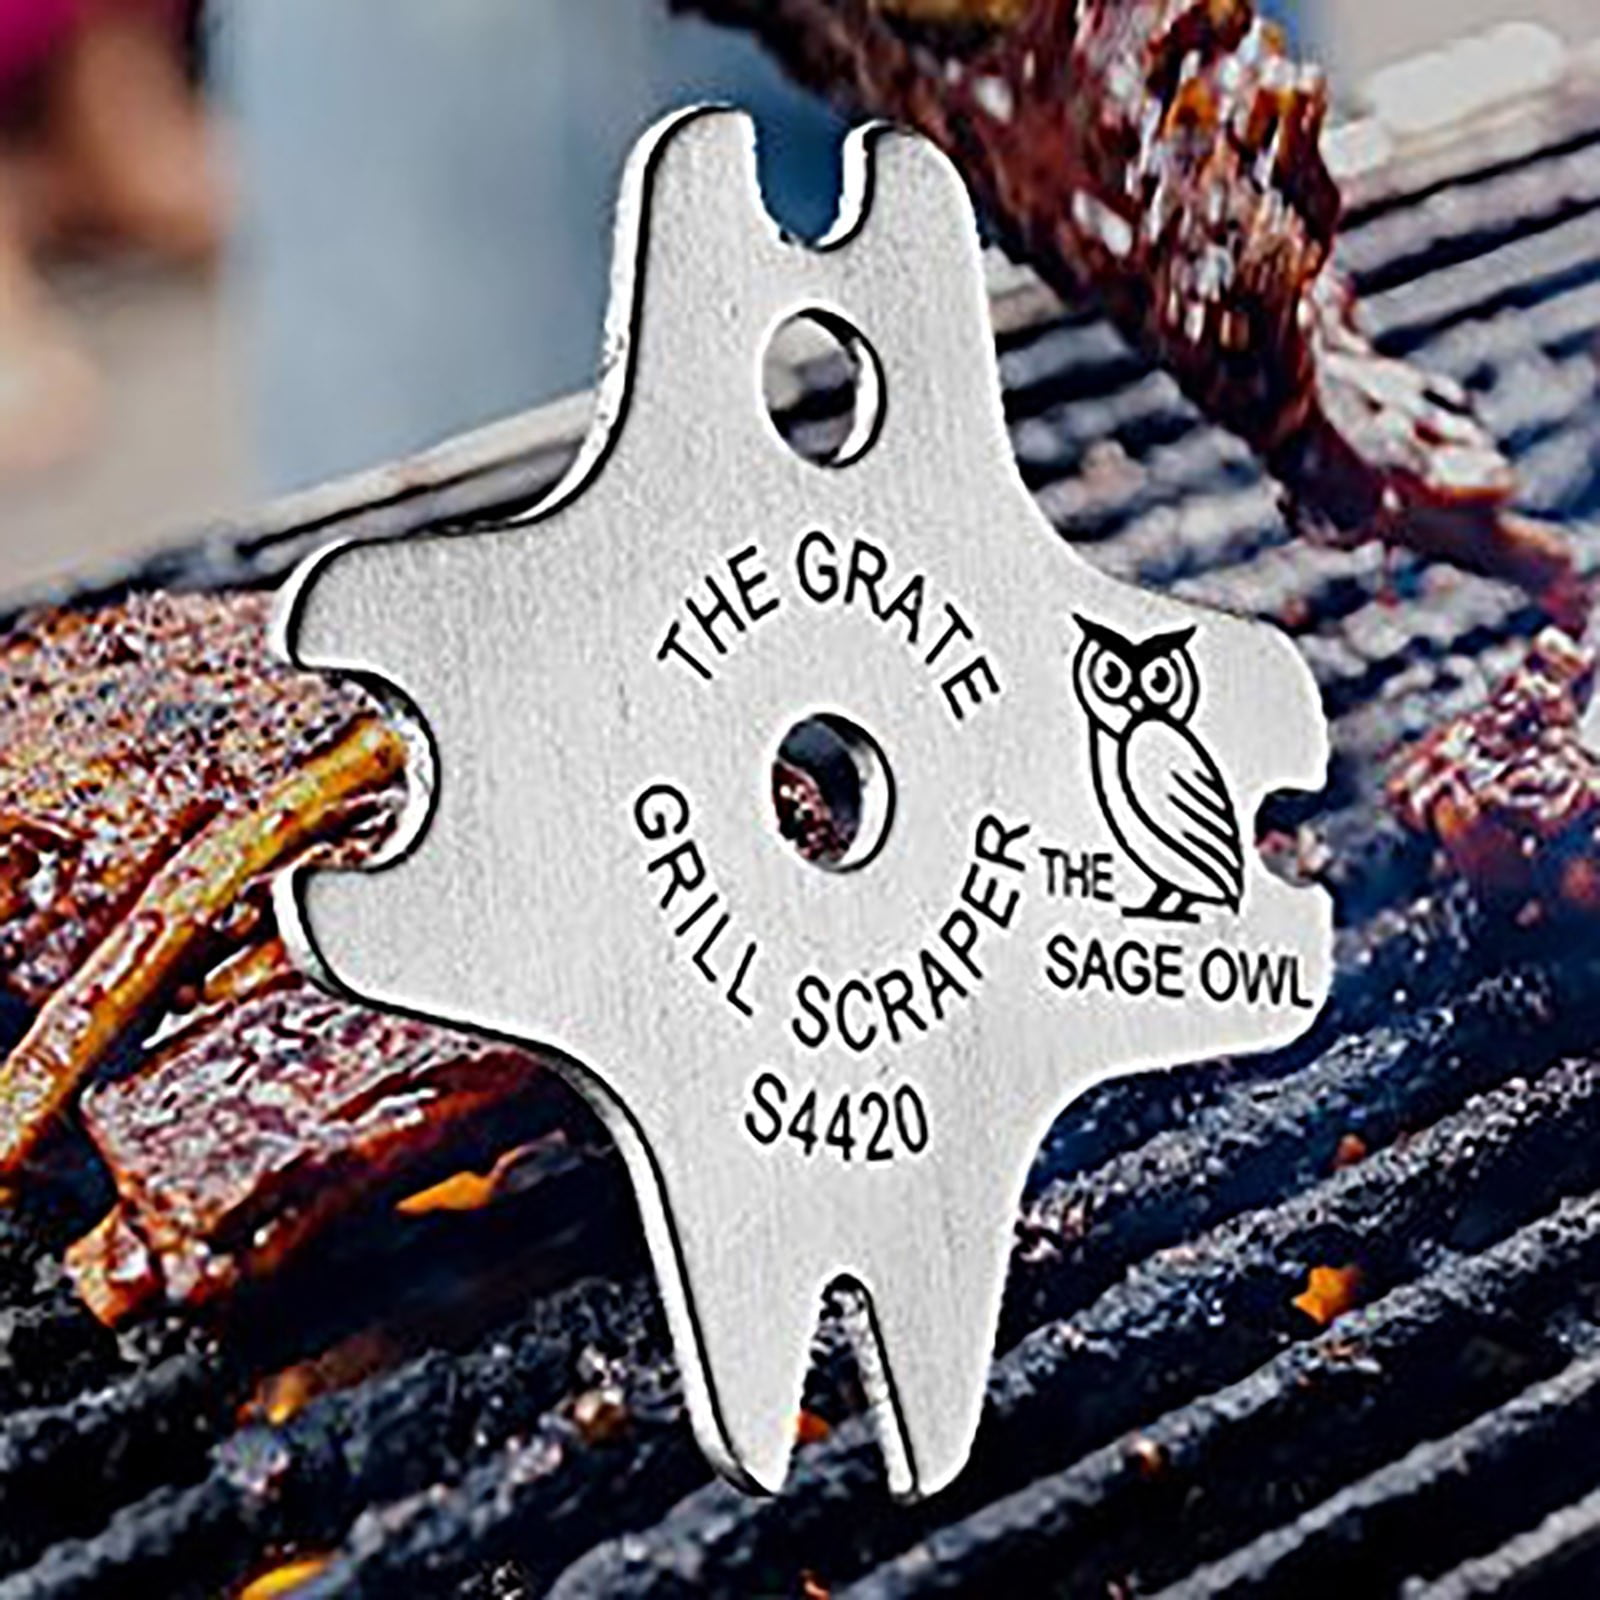 GCP Products GCP-65481516 Bbq Grill Scraper Gifts For Men